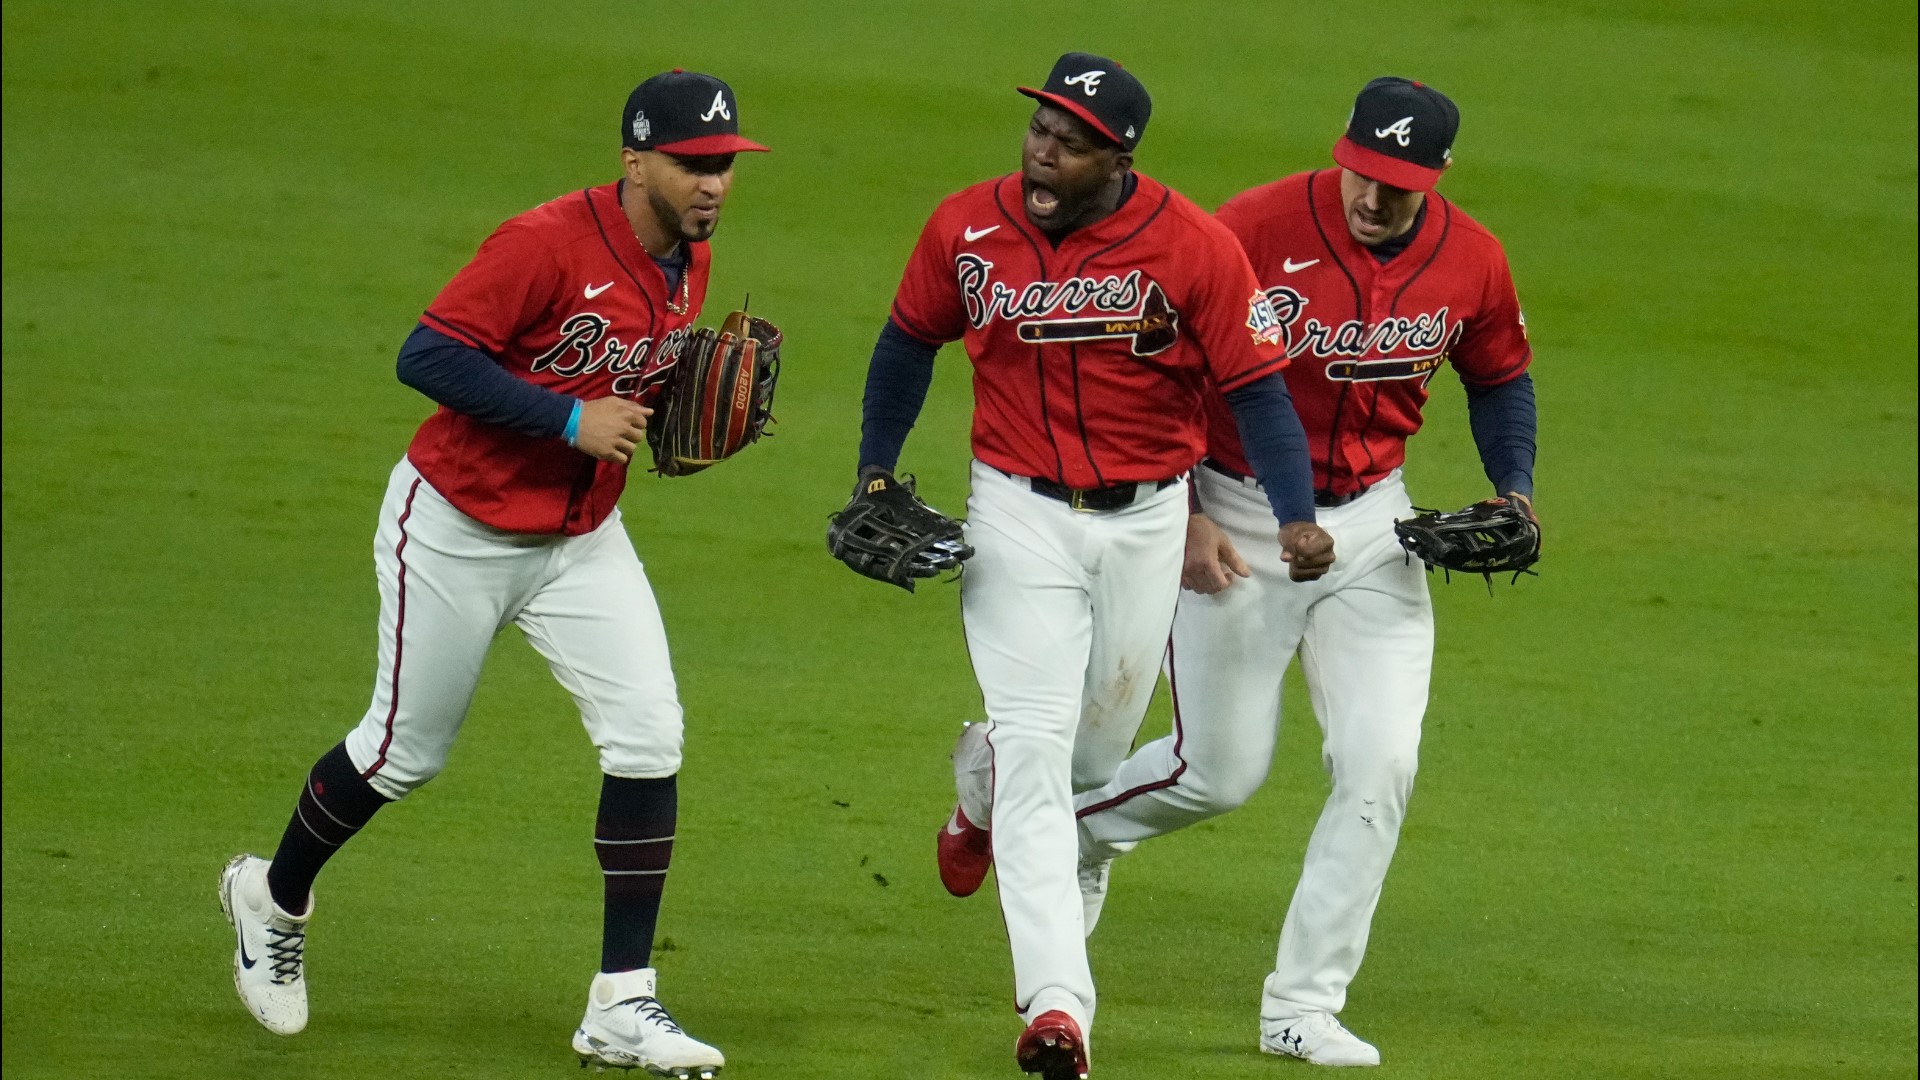 Atlanta Braves now lead the World Series 2-1 after winning game 3 against the Houston Astros in Atlanta at Truist Park.